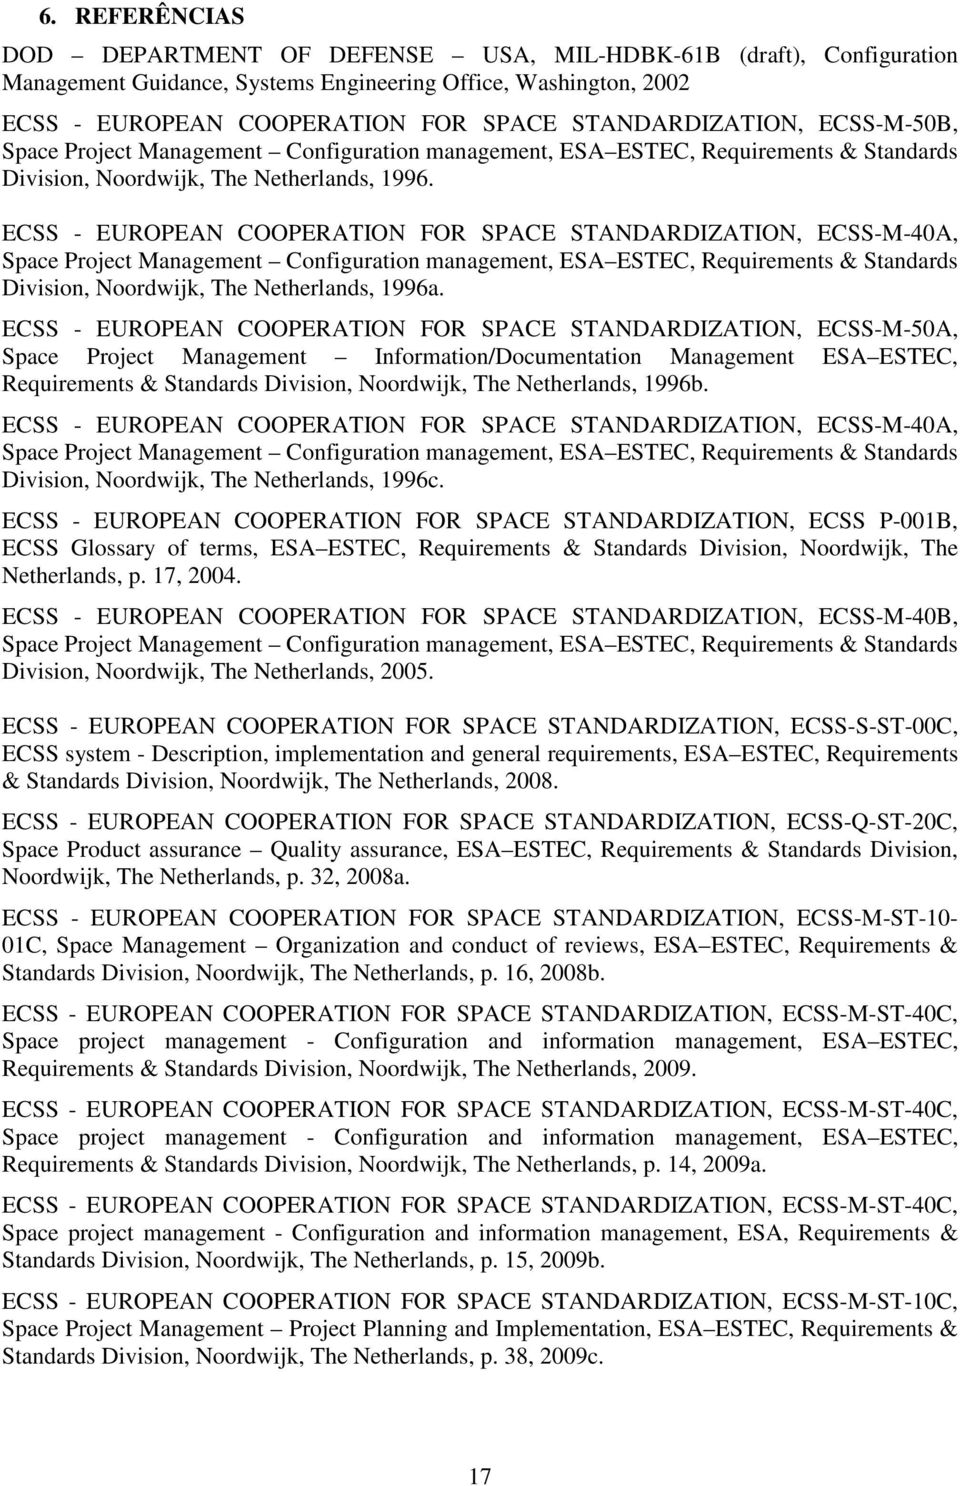 ECSS - EUROPEAN COOPERATION FOR SPACE STANDARDIZATION, ECSS-M-40A, Space Project Management Configuration management, ESA ESTEC, Requirements & Standards Division, Noordwijk, The Netherlands, 1996a.